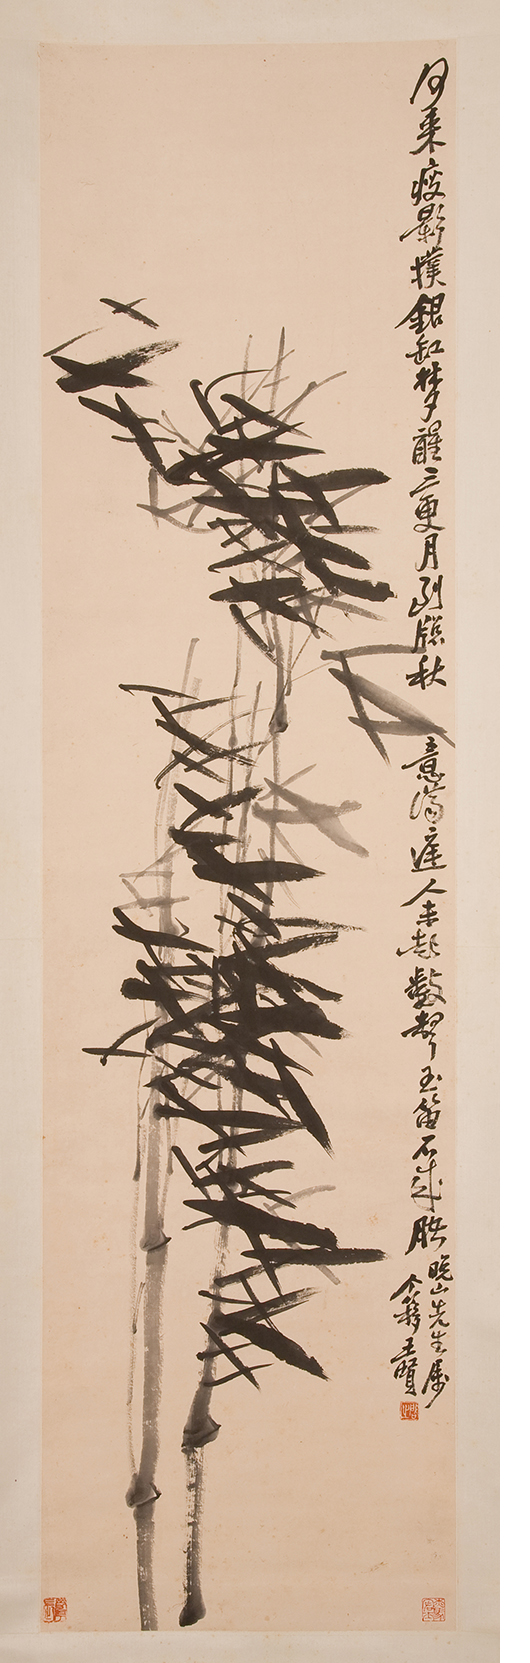 A tall rectangular ink painting of bamboo leaves and stalks. The leaves are quick brushstrokes. A line of Chinese text runs down the right side of the painting.